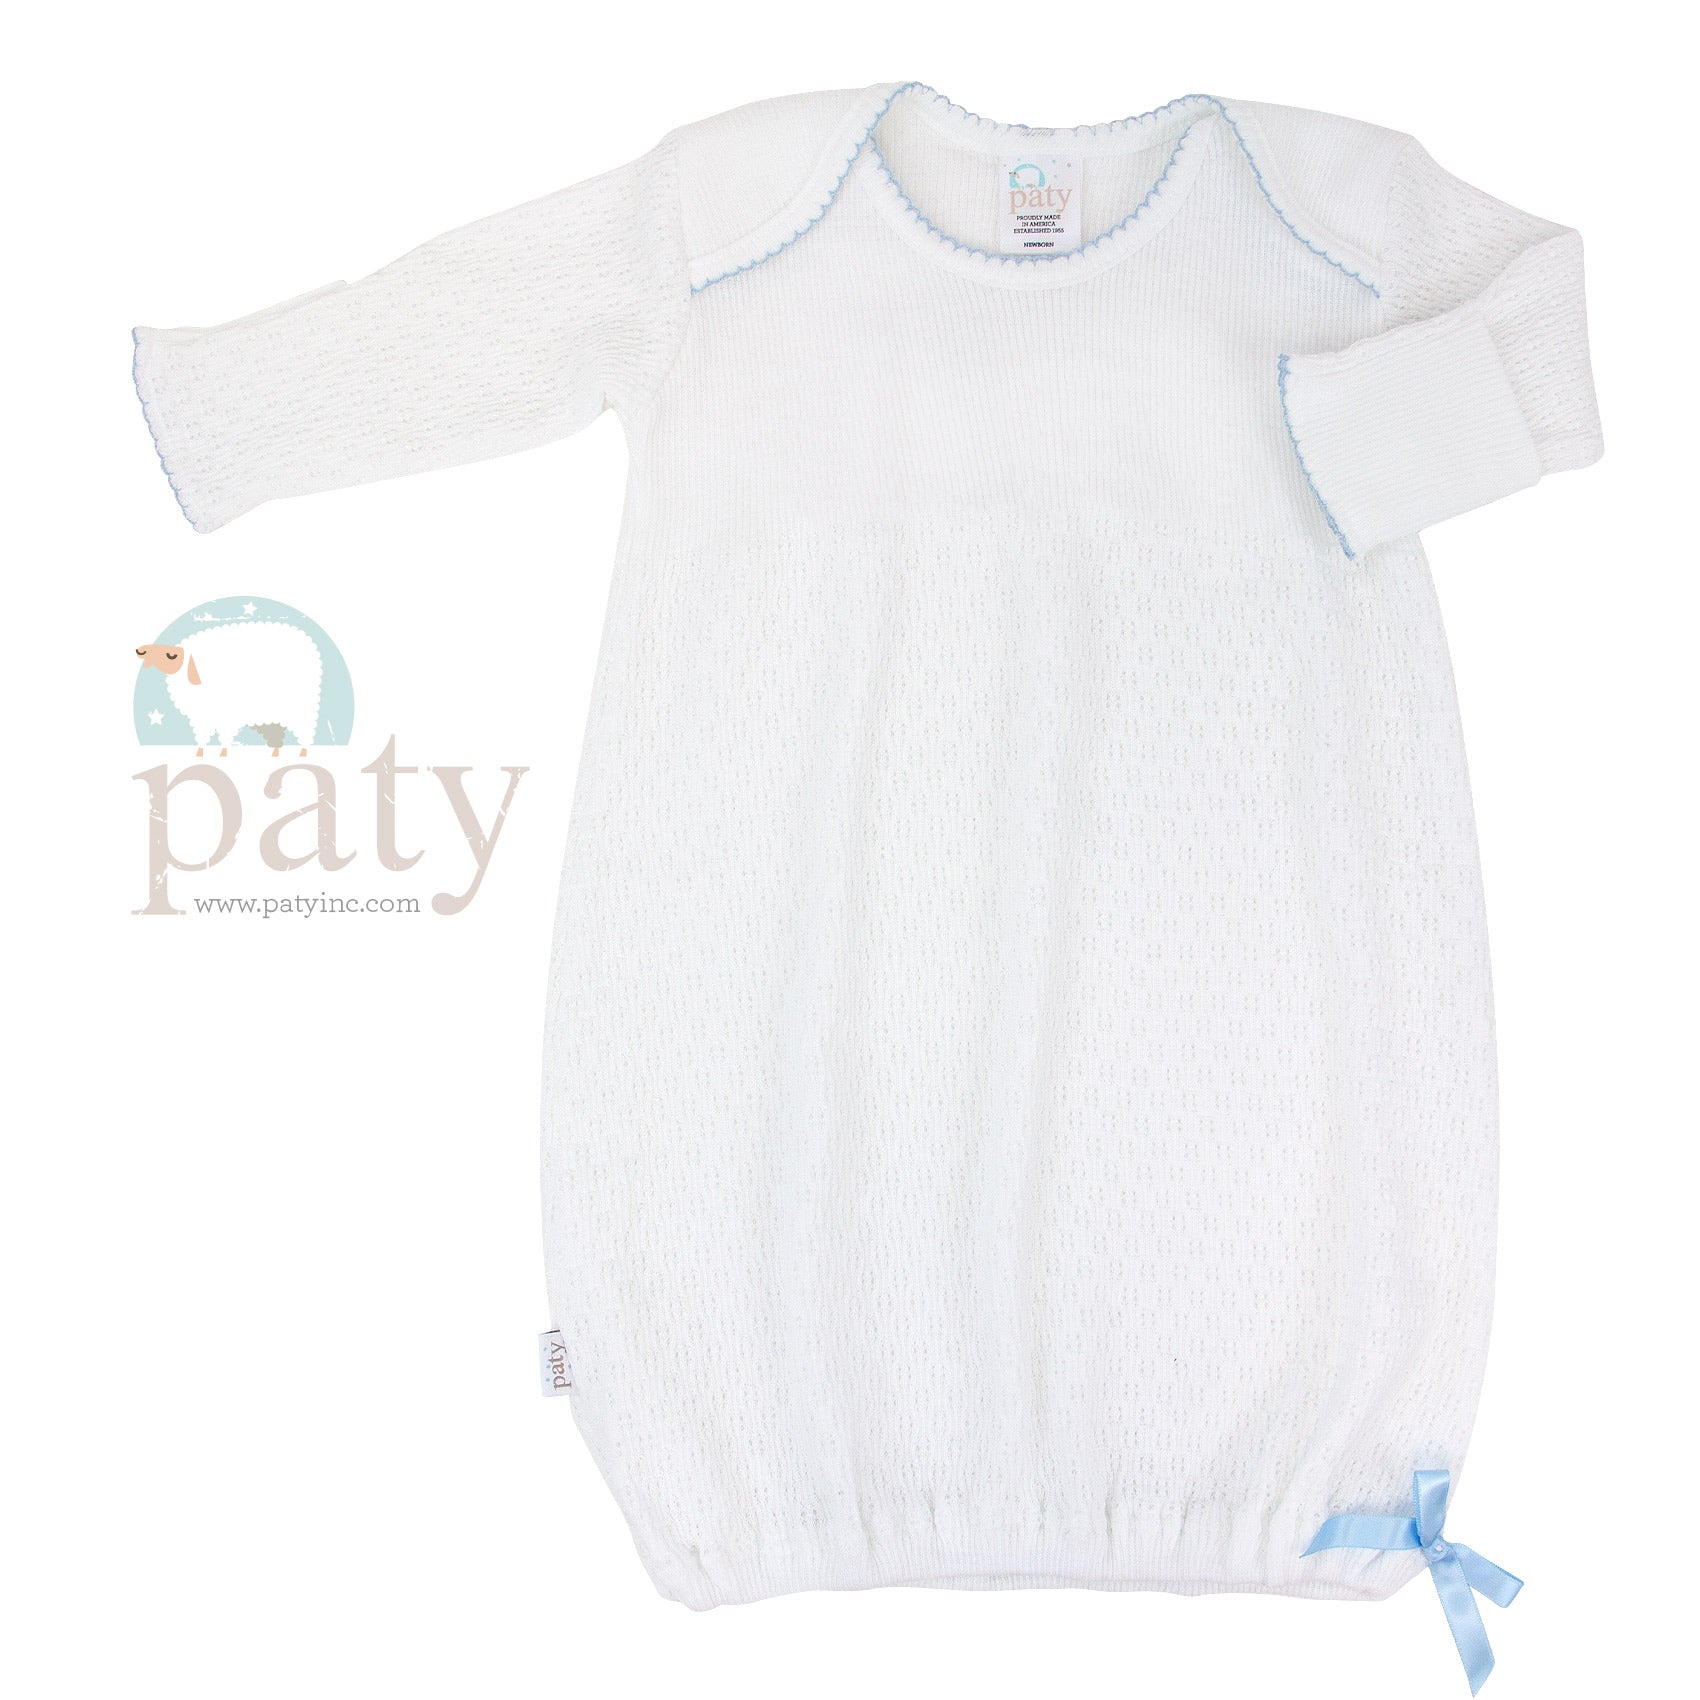 Paty: Knit Overlap Shoulder Gown - White with Blue